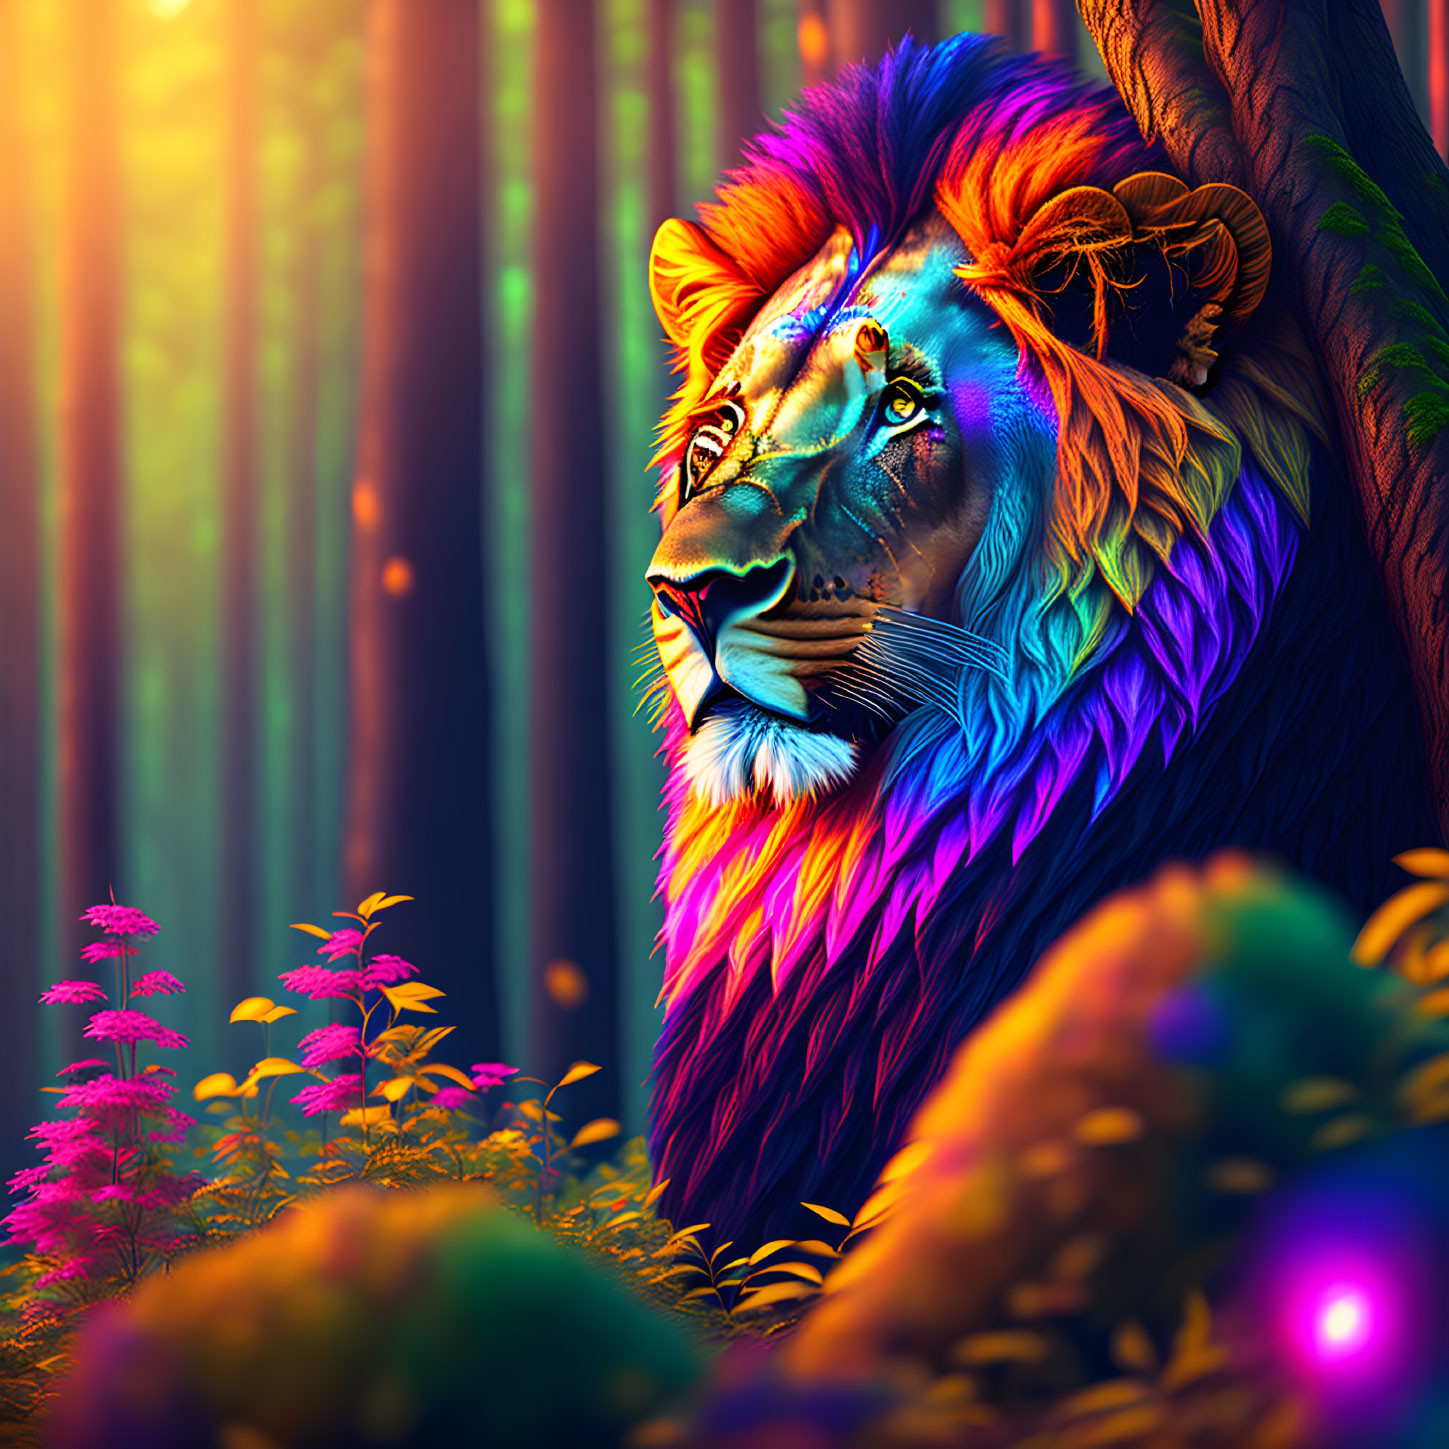 Colorful Lion's Head Emerges in Mystical Forest